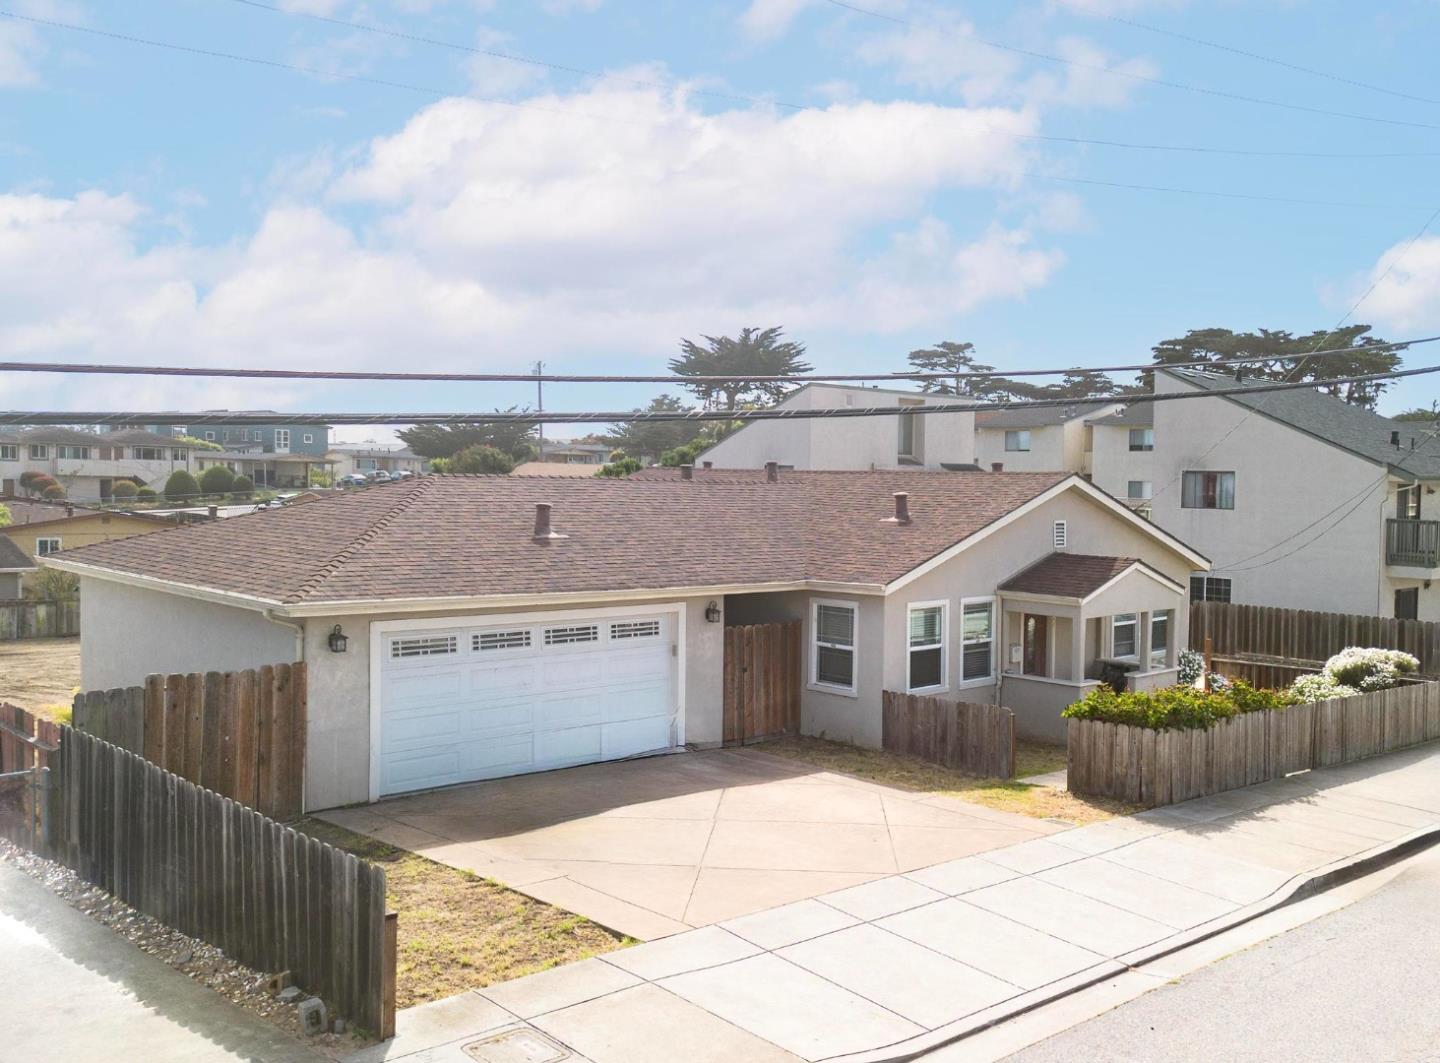 Photo of 224 Palm Ave in Marina, CA